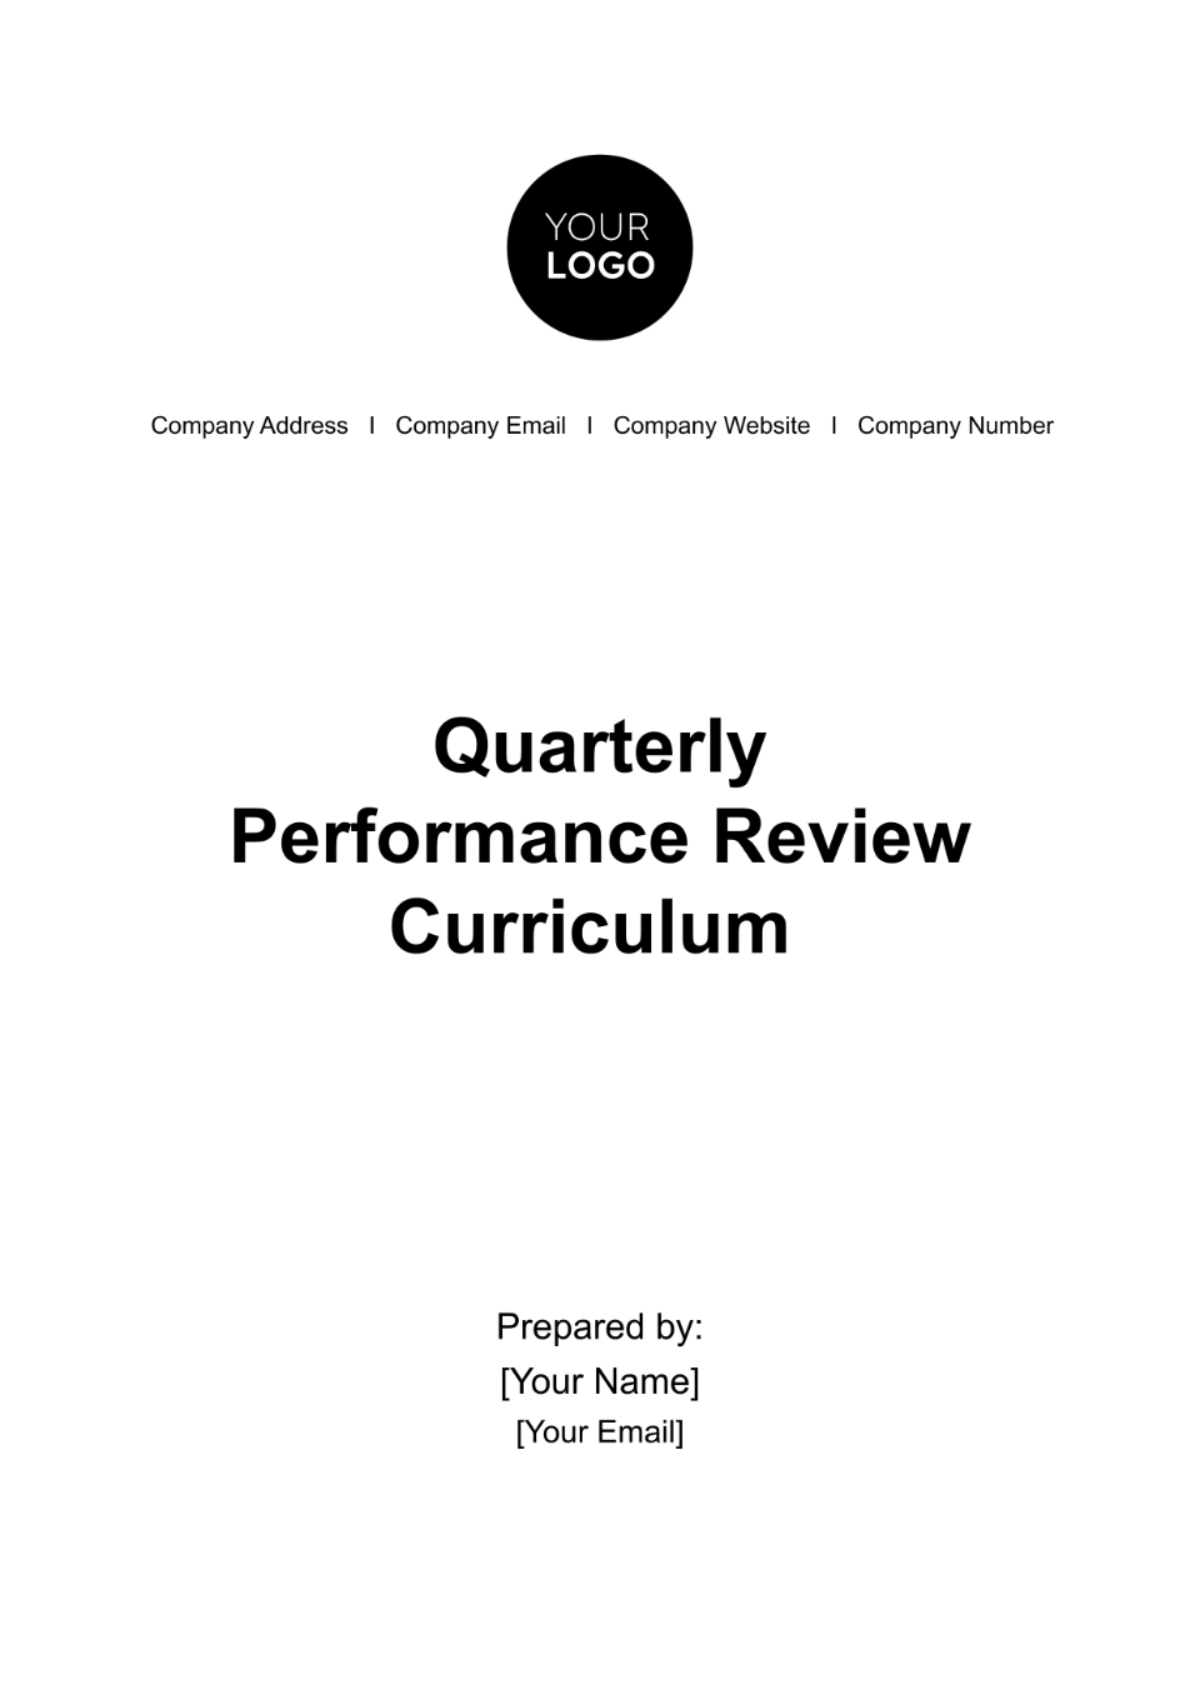 Free Quarterly Performance Review Curriculum HR Template